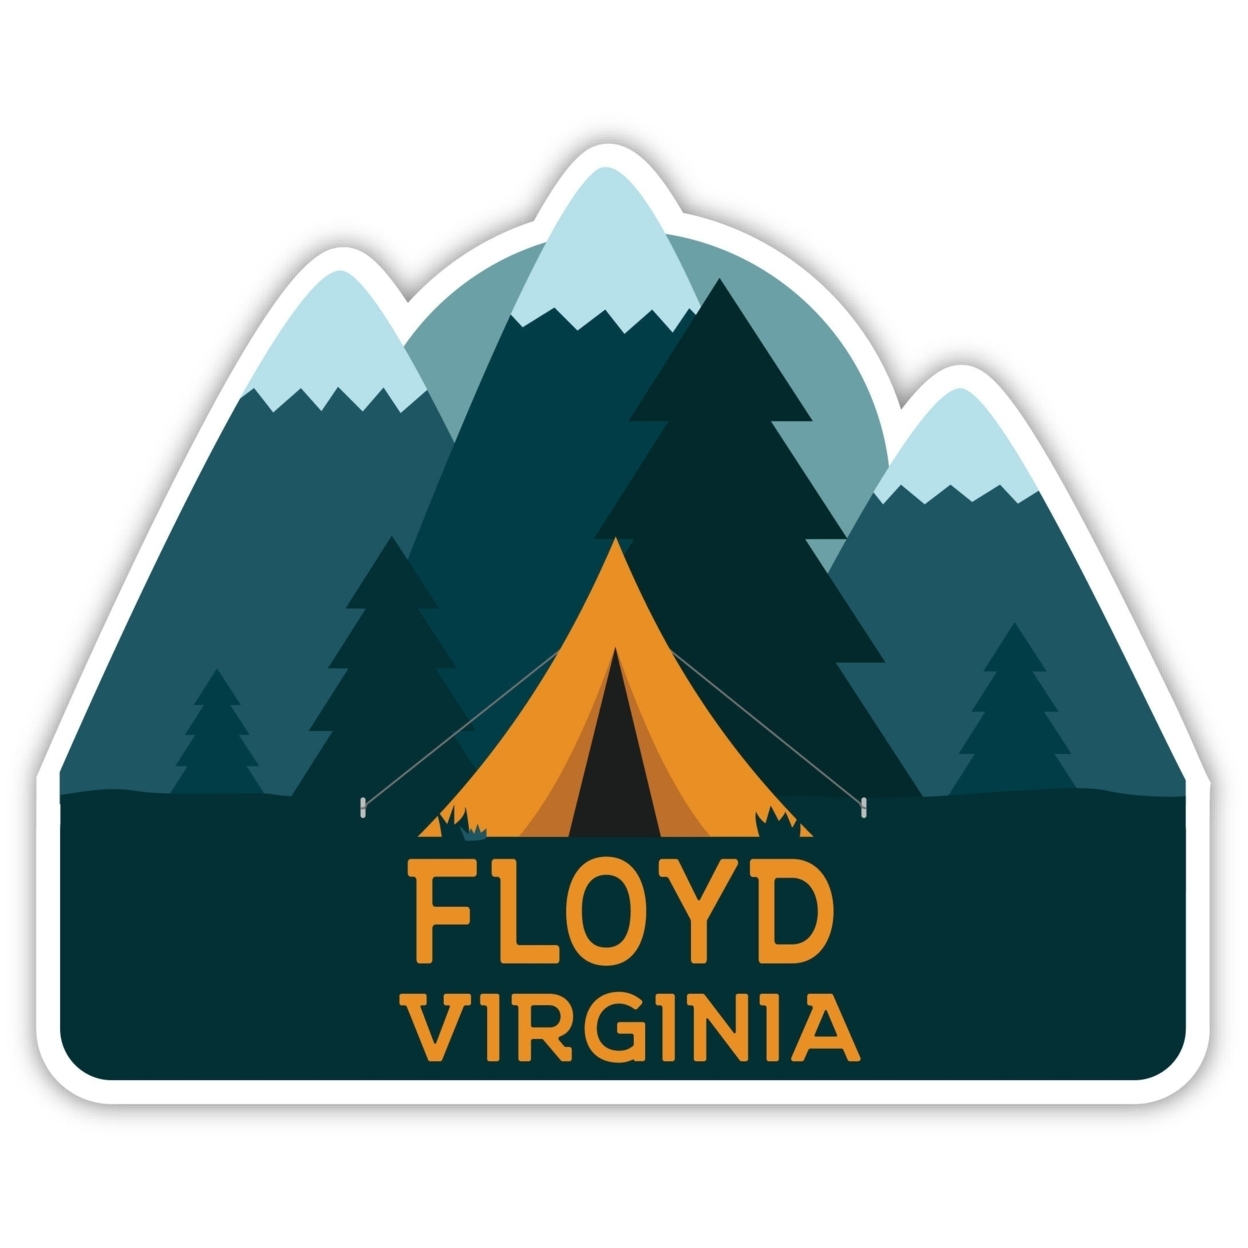 Floyd Virginia Souvenir Decorative Stickers (Choose Theme And Size) - 4-Pack, 12-Inch, Tent